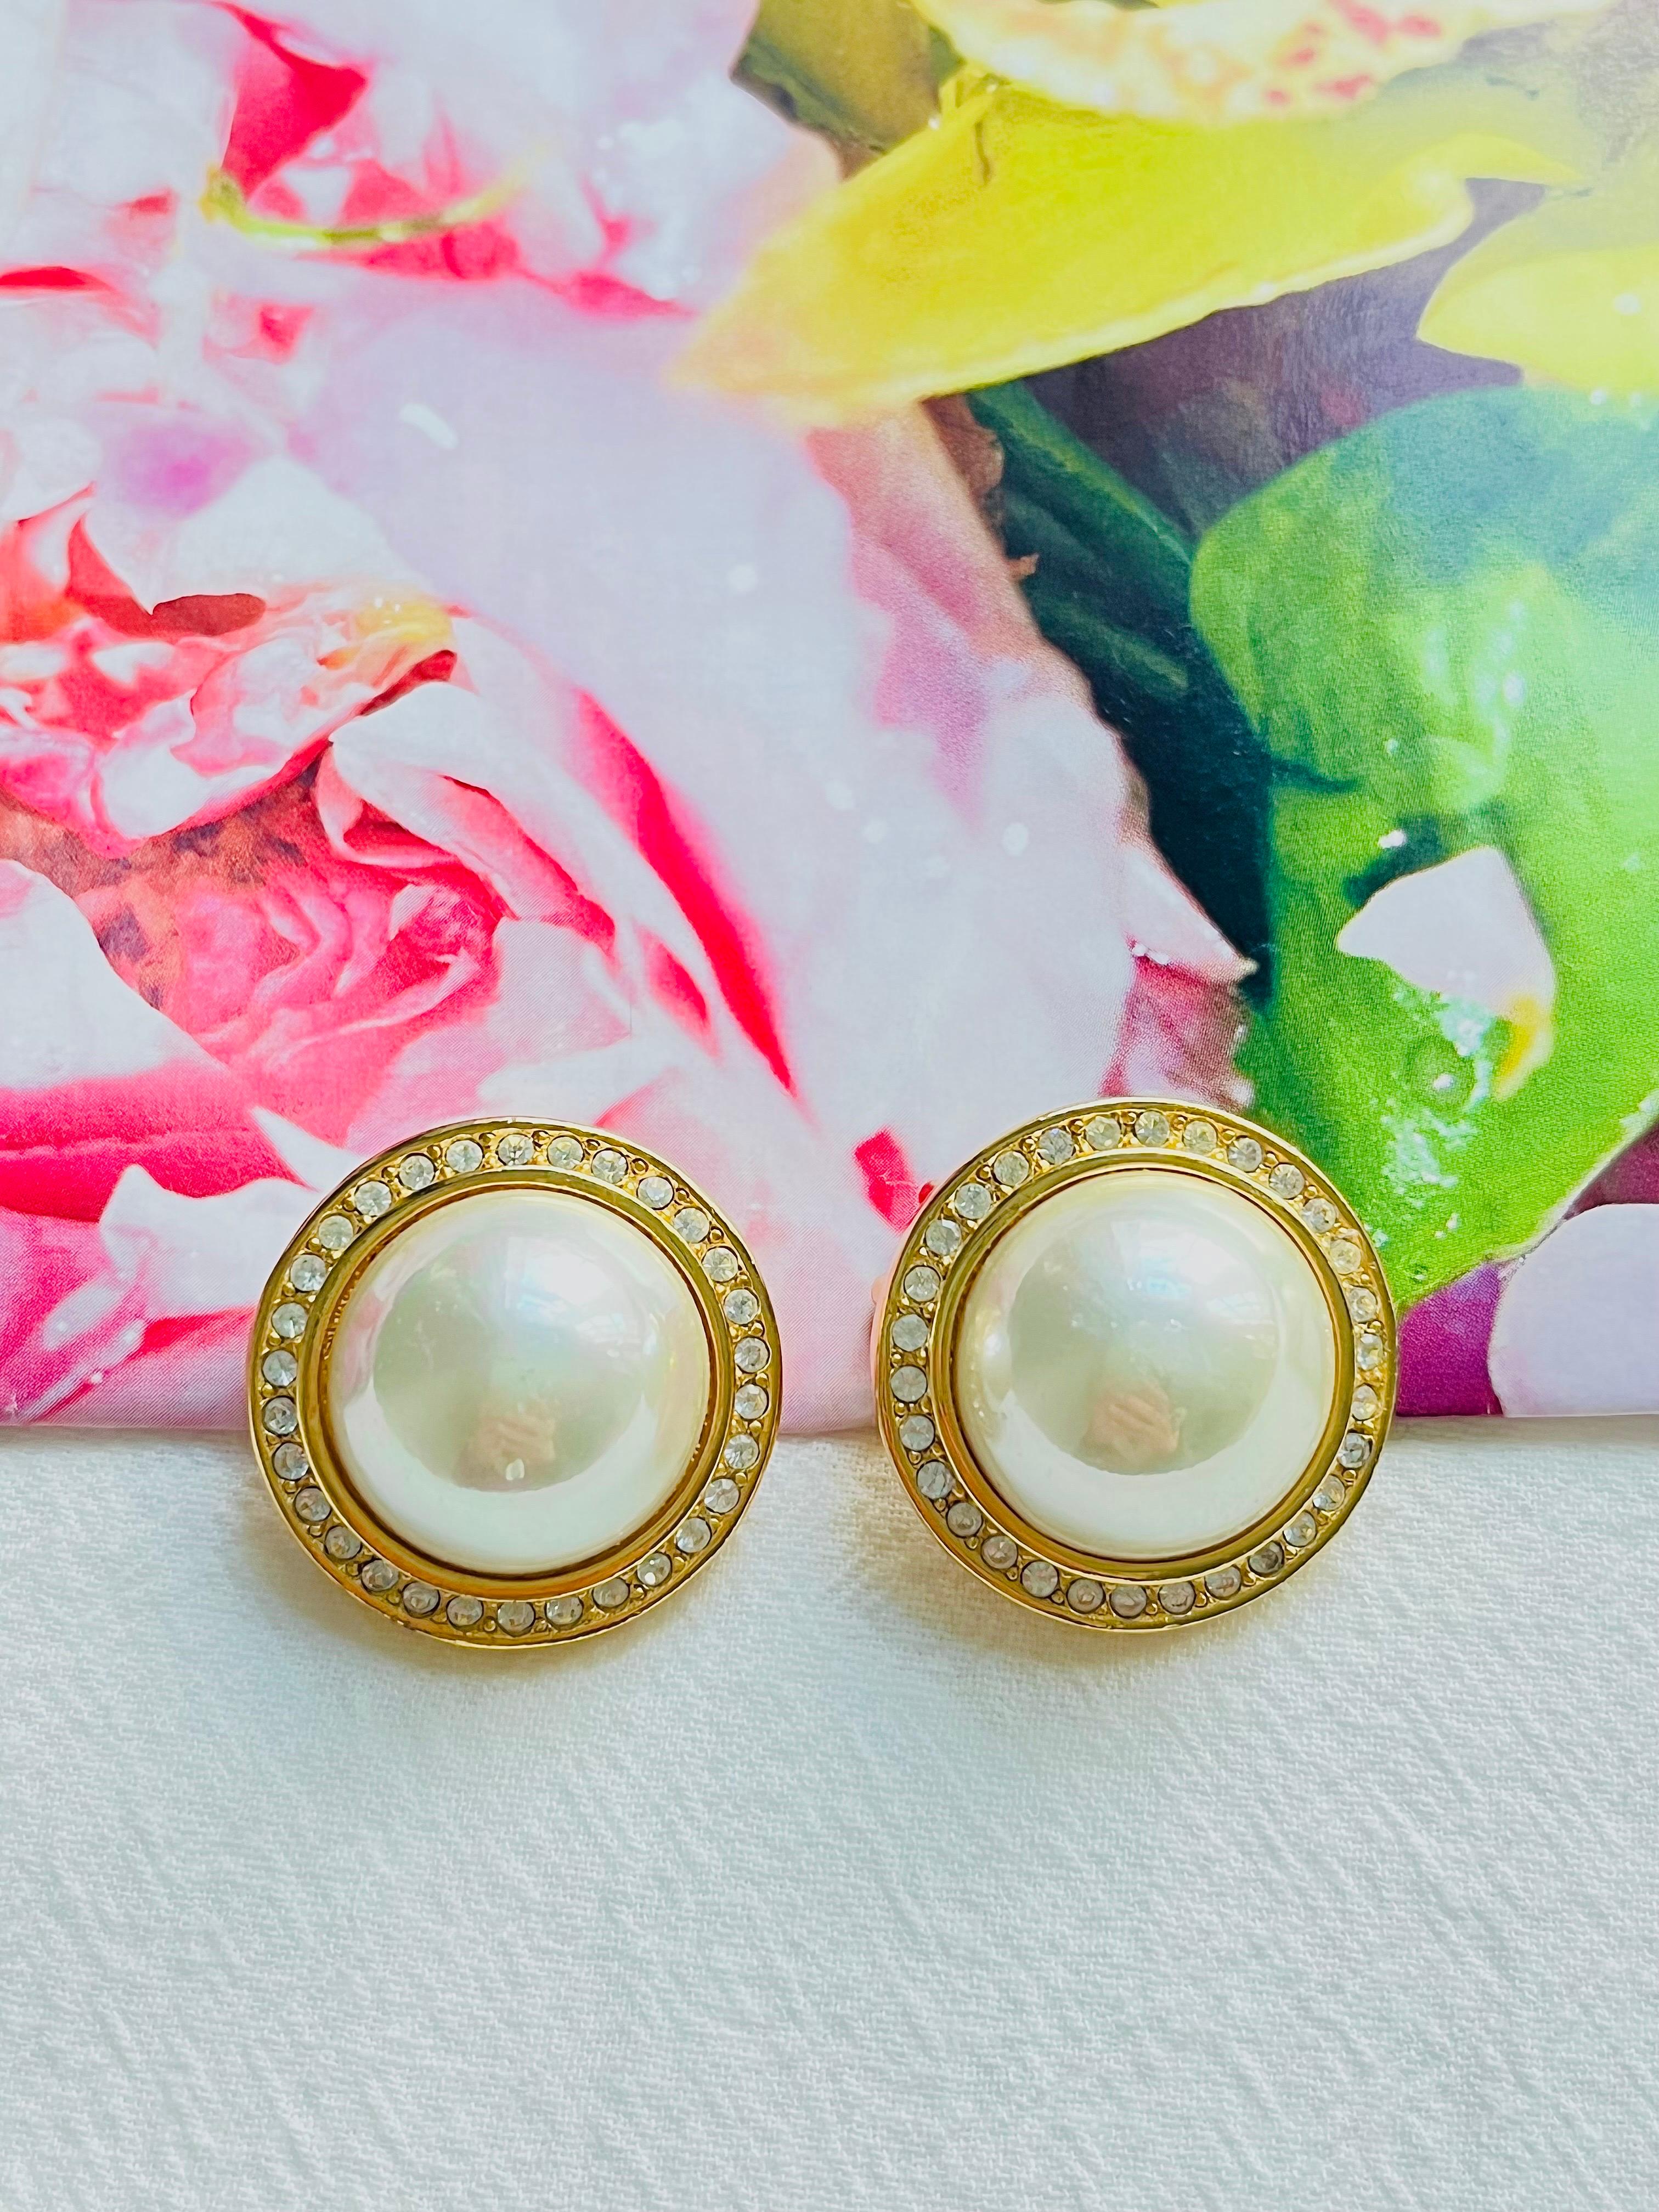 Christian Dior GROSSE 1990 CHC Large Round White Pearl Crystals Clip Earrings, Gold Tone

Very good condition. Very light scratches, barely noticeable. Not any stones lost, but one is cloudy. 

Vintage and rare to find. 100% Genuine.  Rare to find.